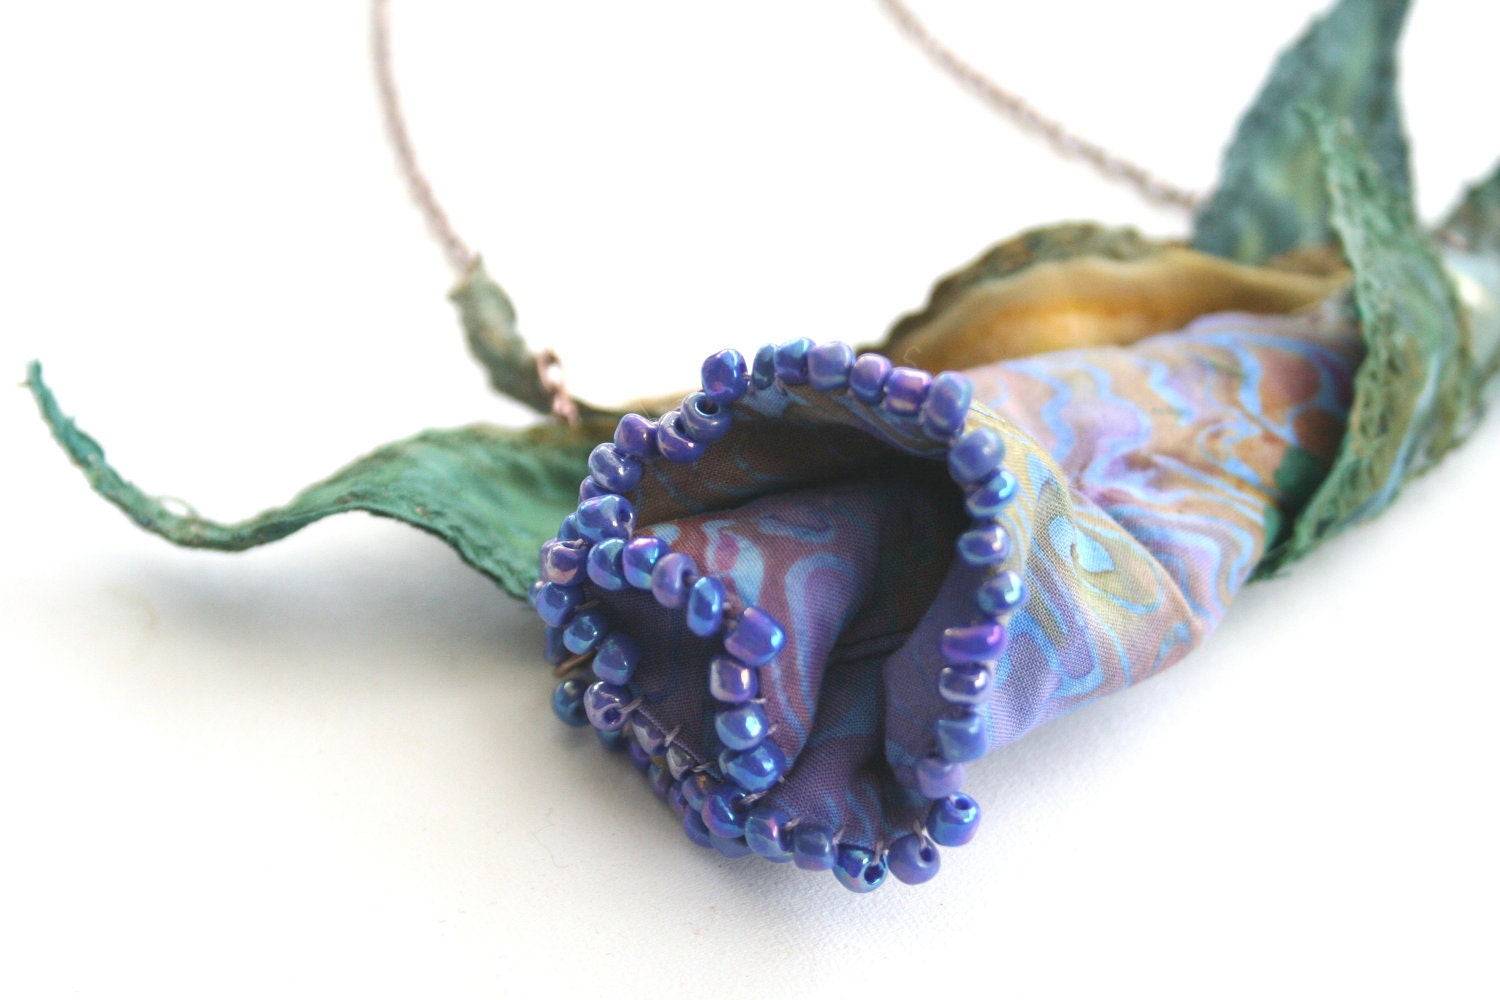 Necklace Beaded Batik Fabric Lily  - Soft Sculpture Flower in Moss and Purple Tones with Fabric Leaves - PaintFabricWhimsy